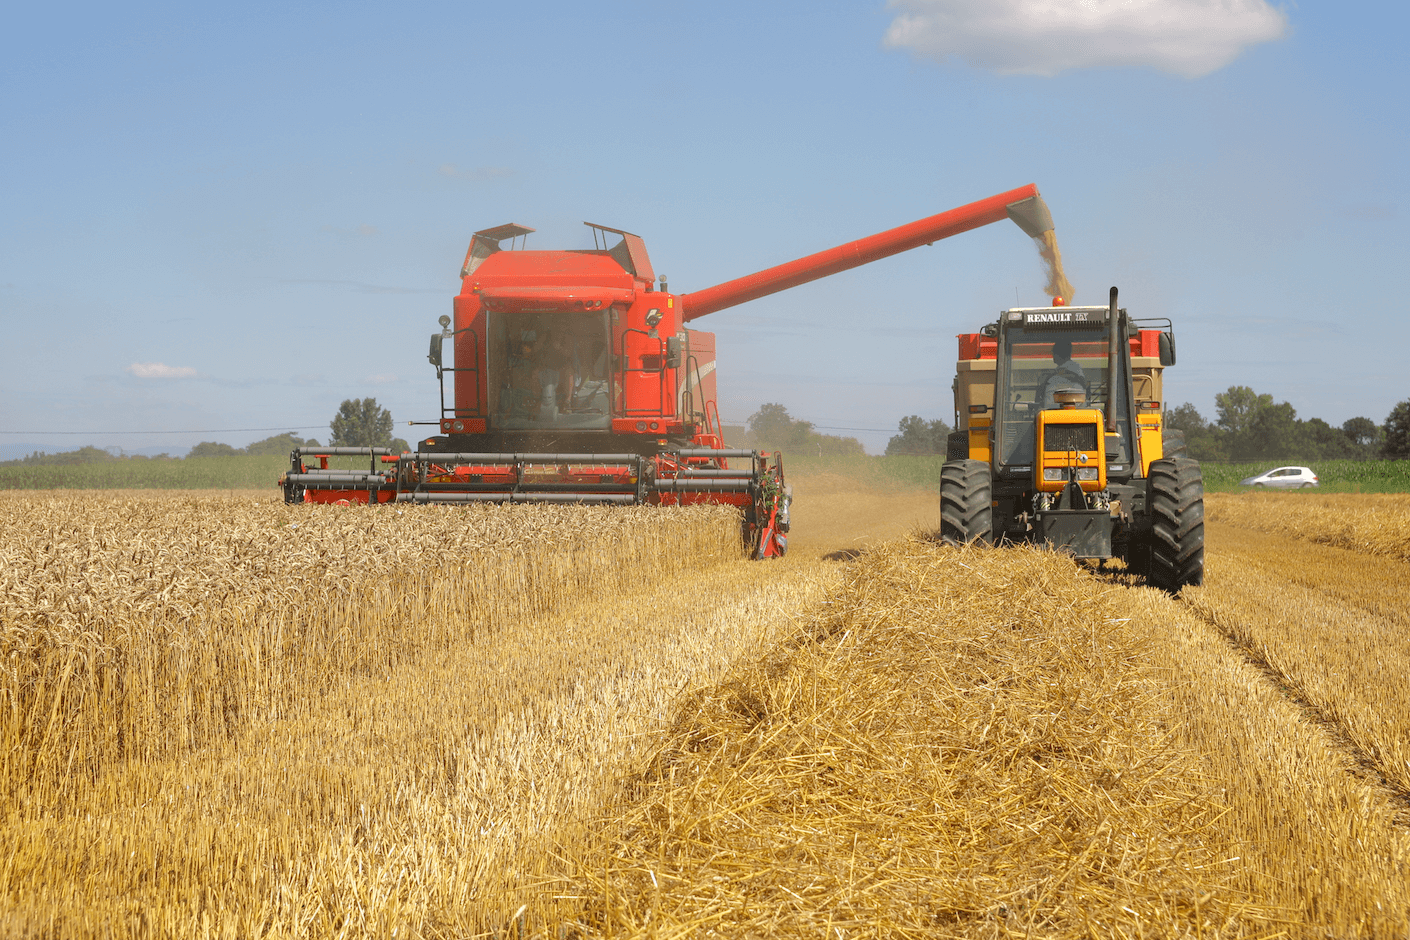 Combine harvester harvesting wheat whilst unloading it into a tractor